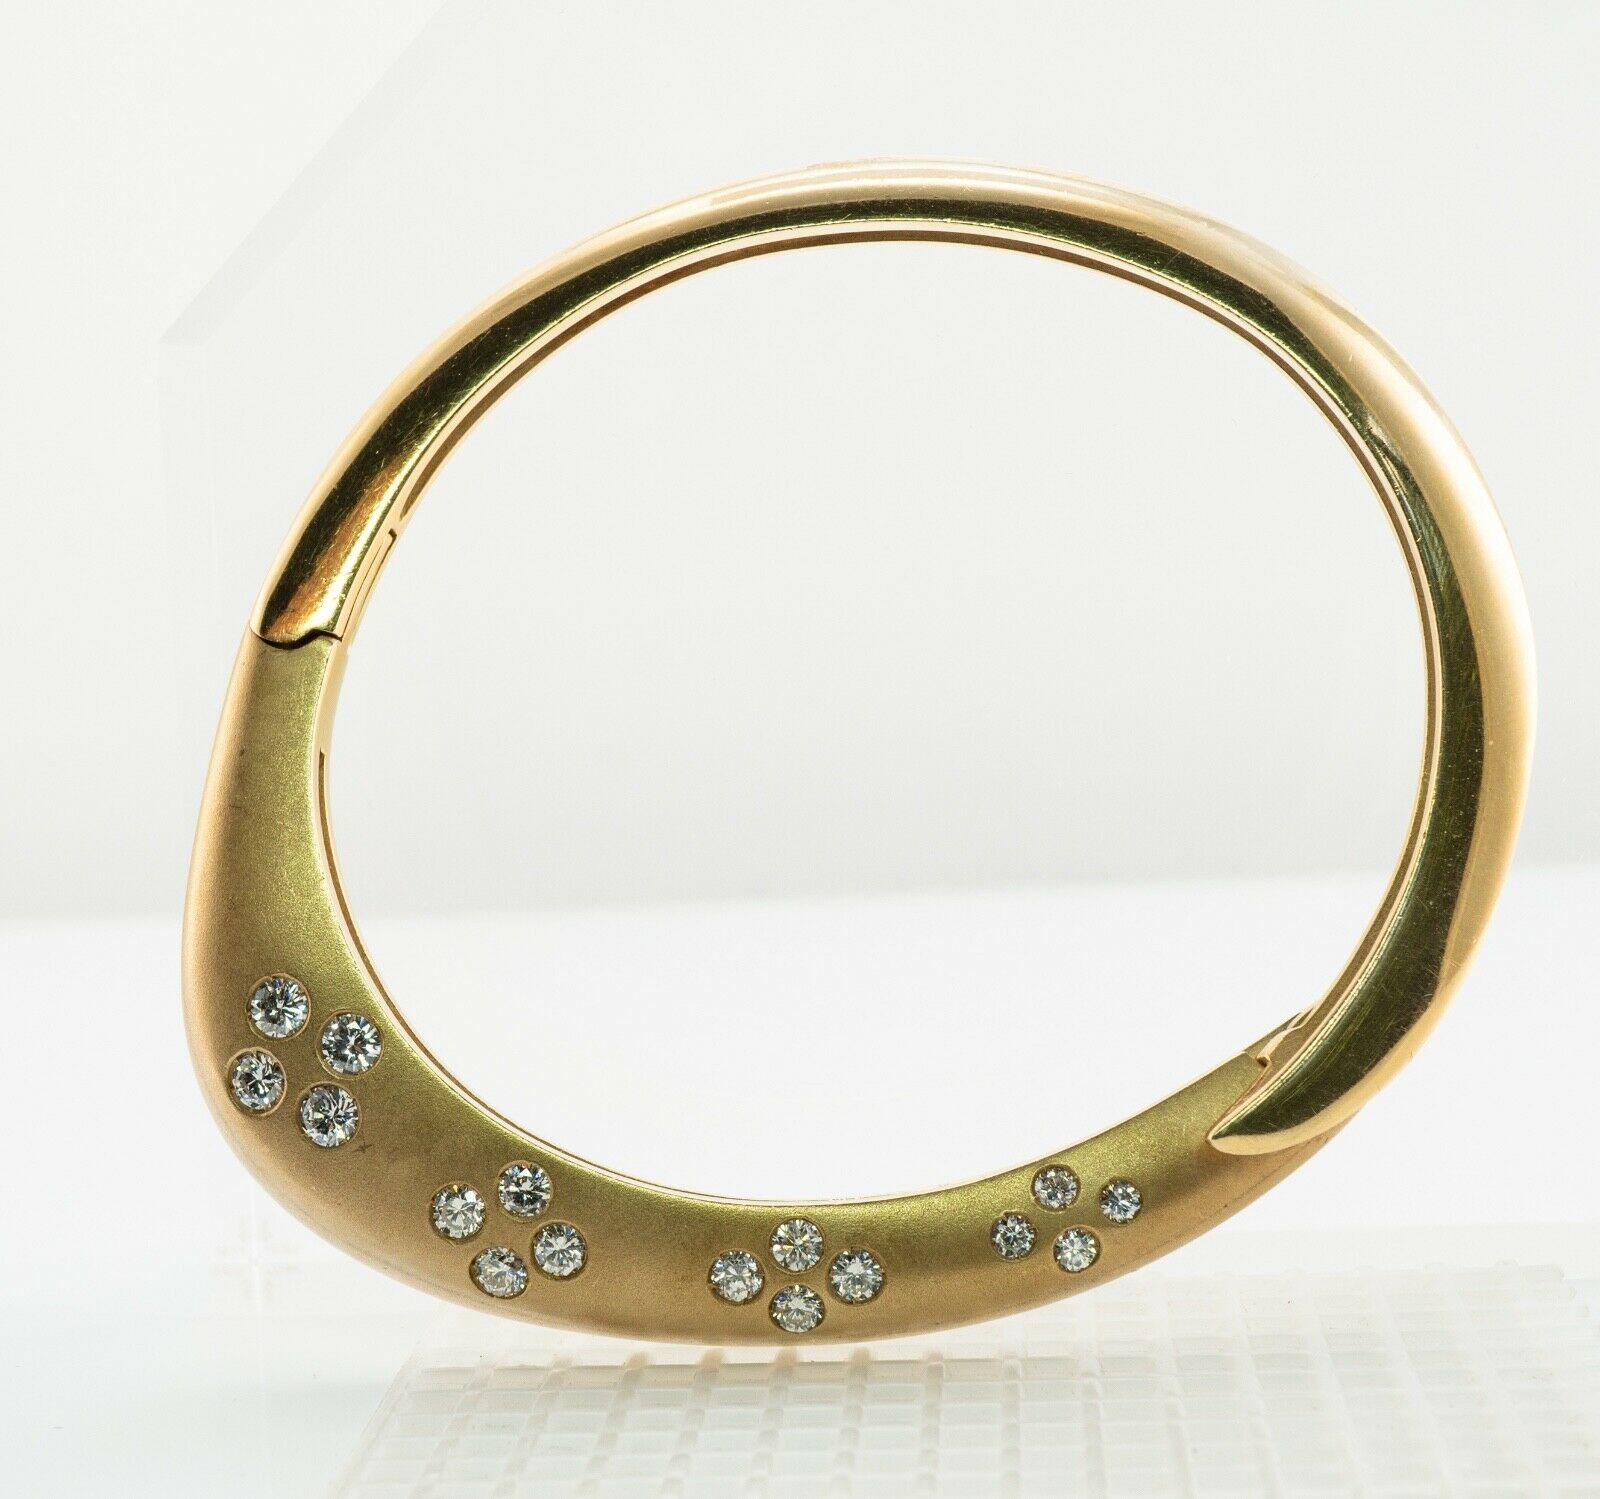 This very unusual and one of a kind bangle bracelet is crated in solid 14K Yellow gold. It is also hallmarked with Jean ©. Sixteen round brilliant cut diamonds are set in brushed gold. They are VS2-SI1 clarity and H color totaling 1.62 carats. The